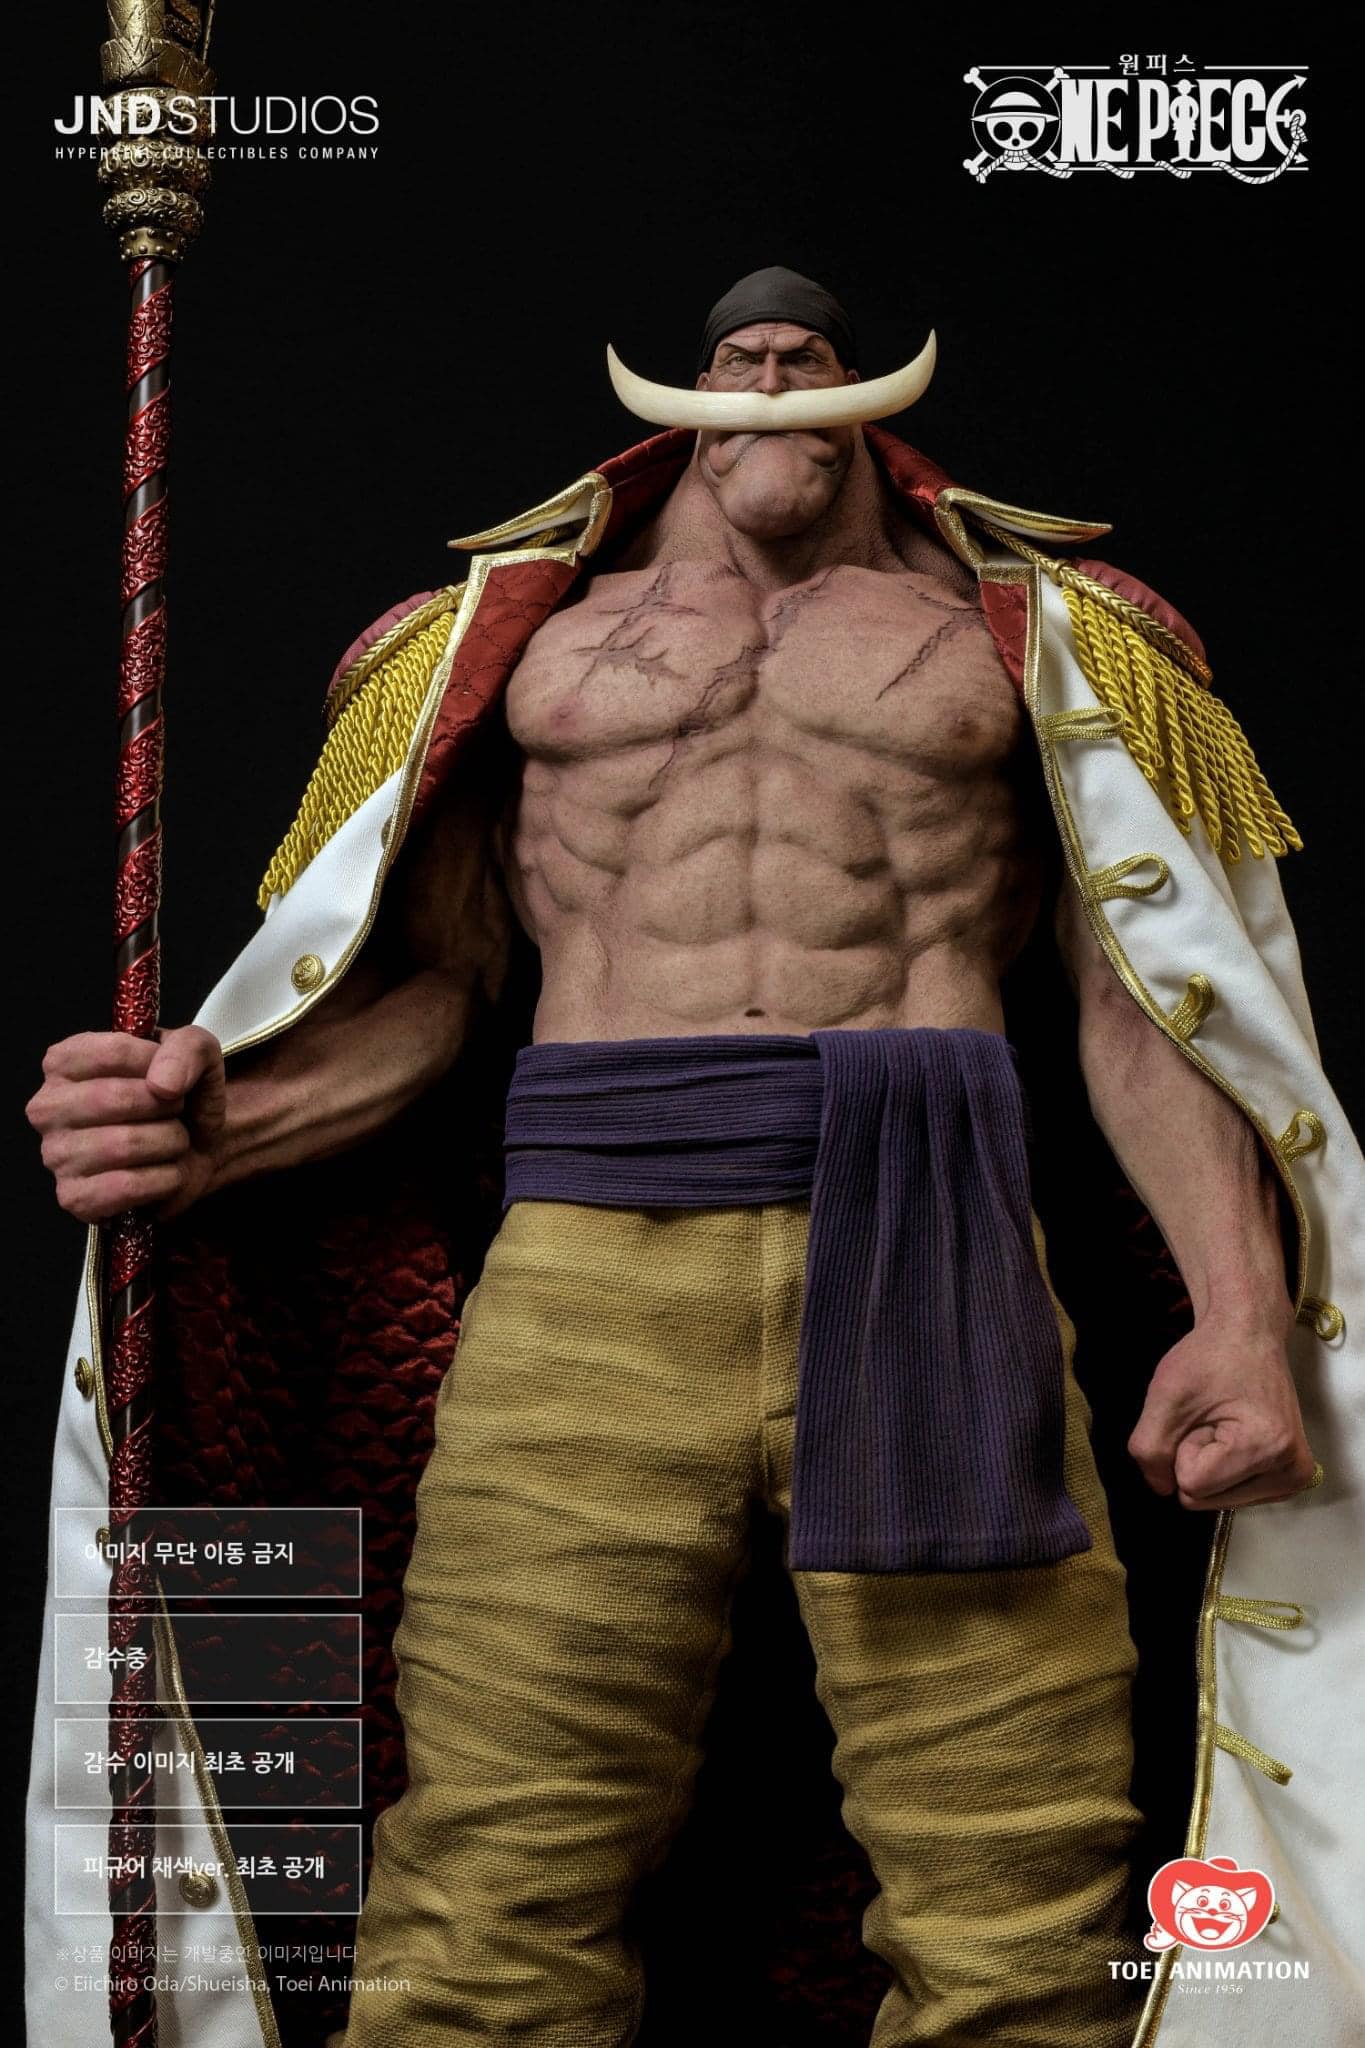 One Piece … DOES EXIST! Just got this epic statue of Whitebeard. : r/ OnePiece